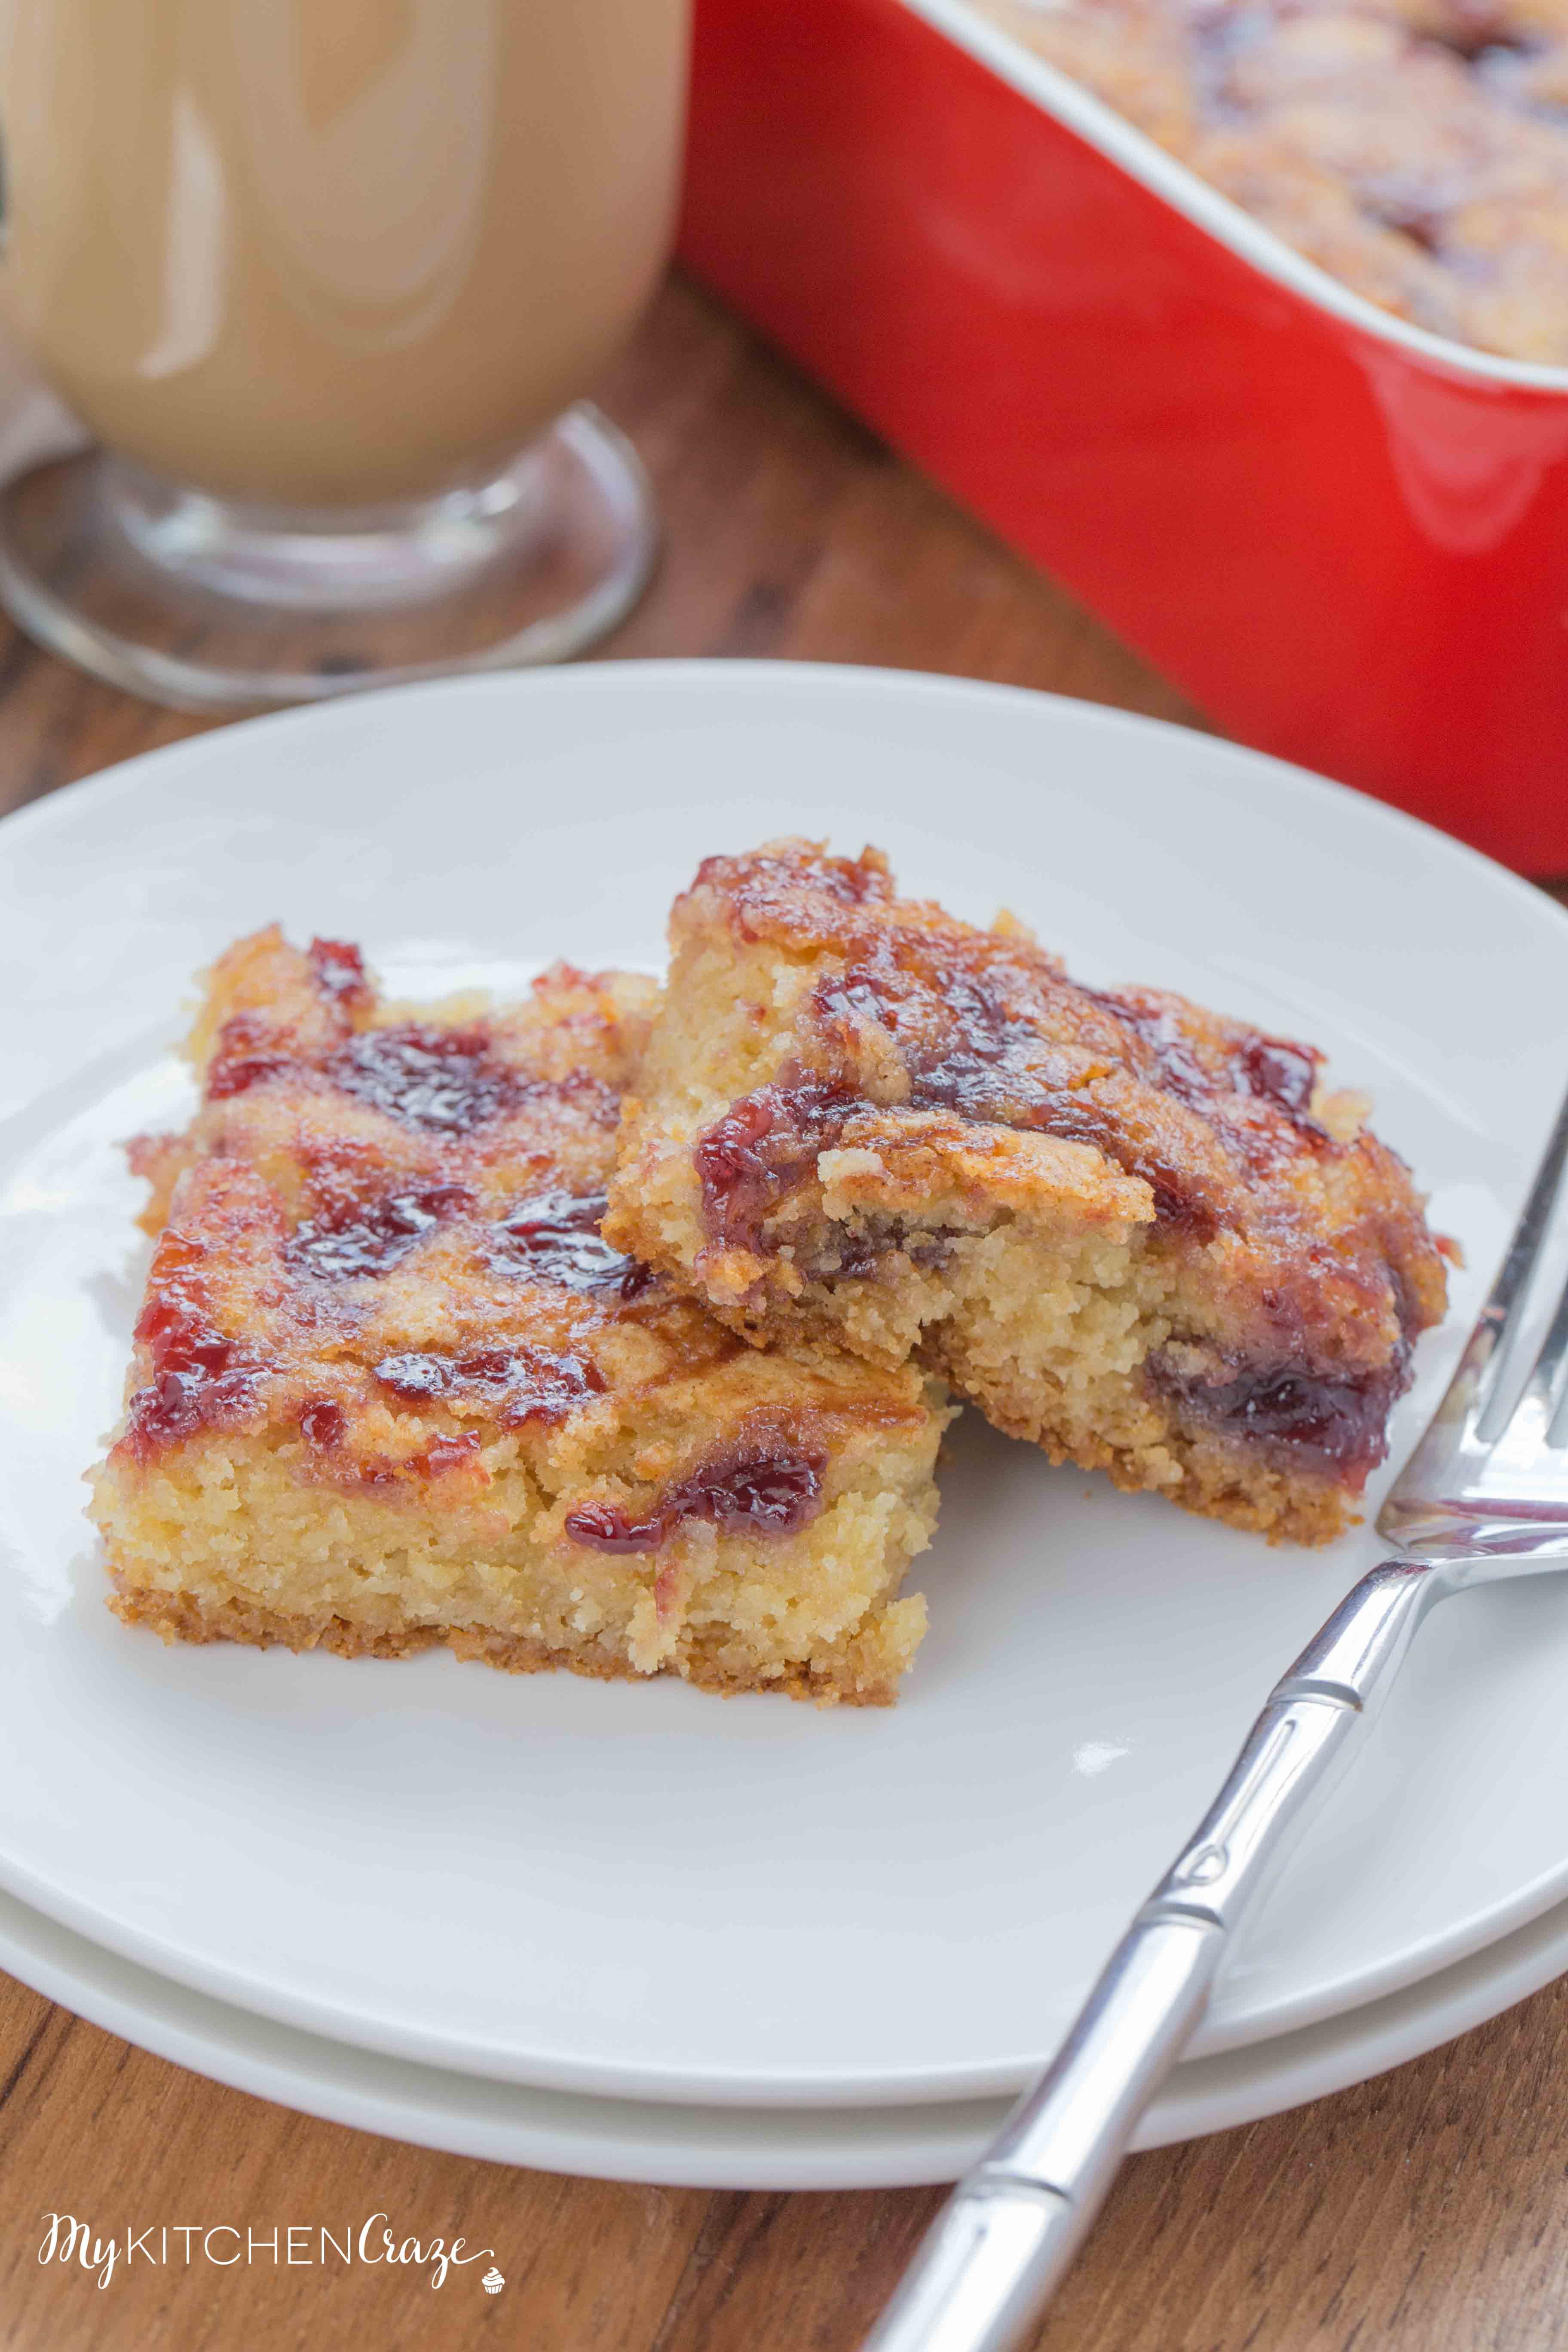 Raspberry Blondies ~ mykitchencraze.com ~ Simple and delicious blondie bars everyone will love.